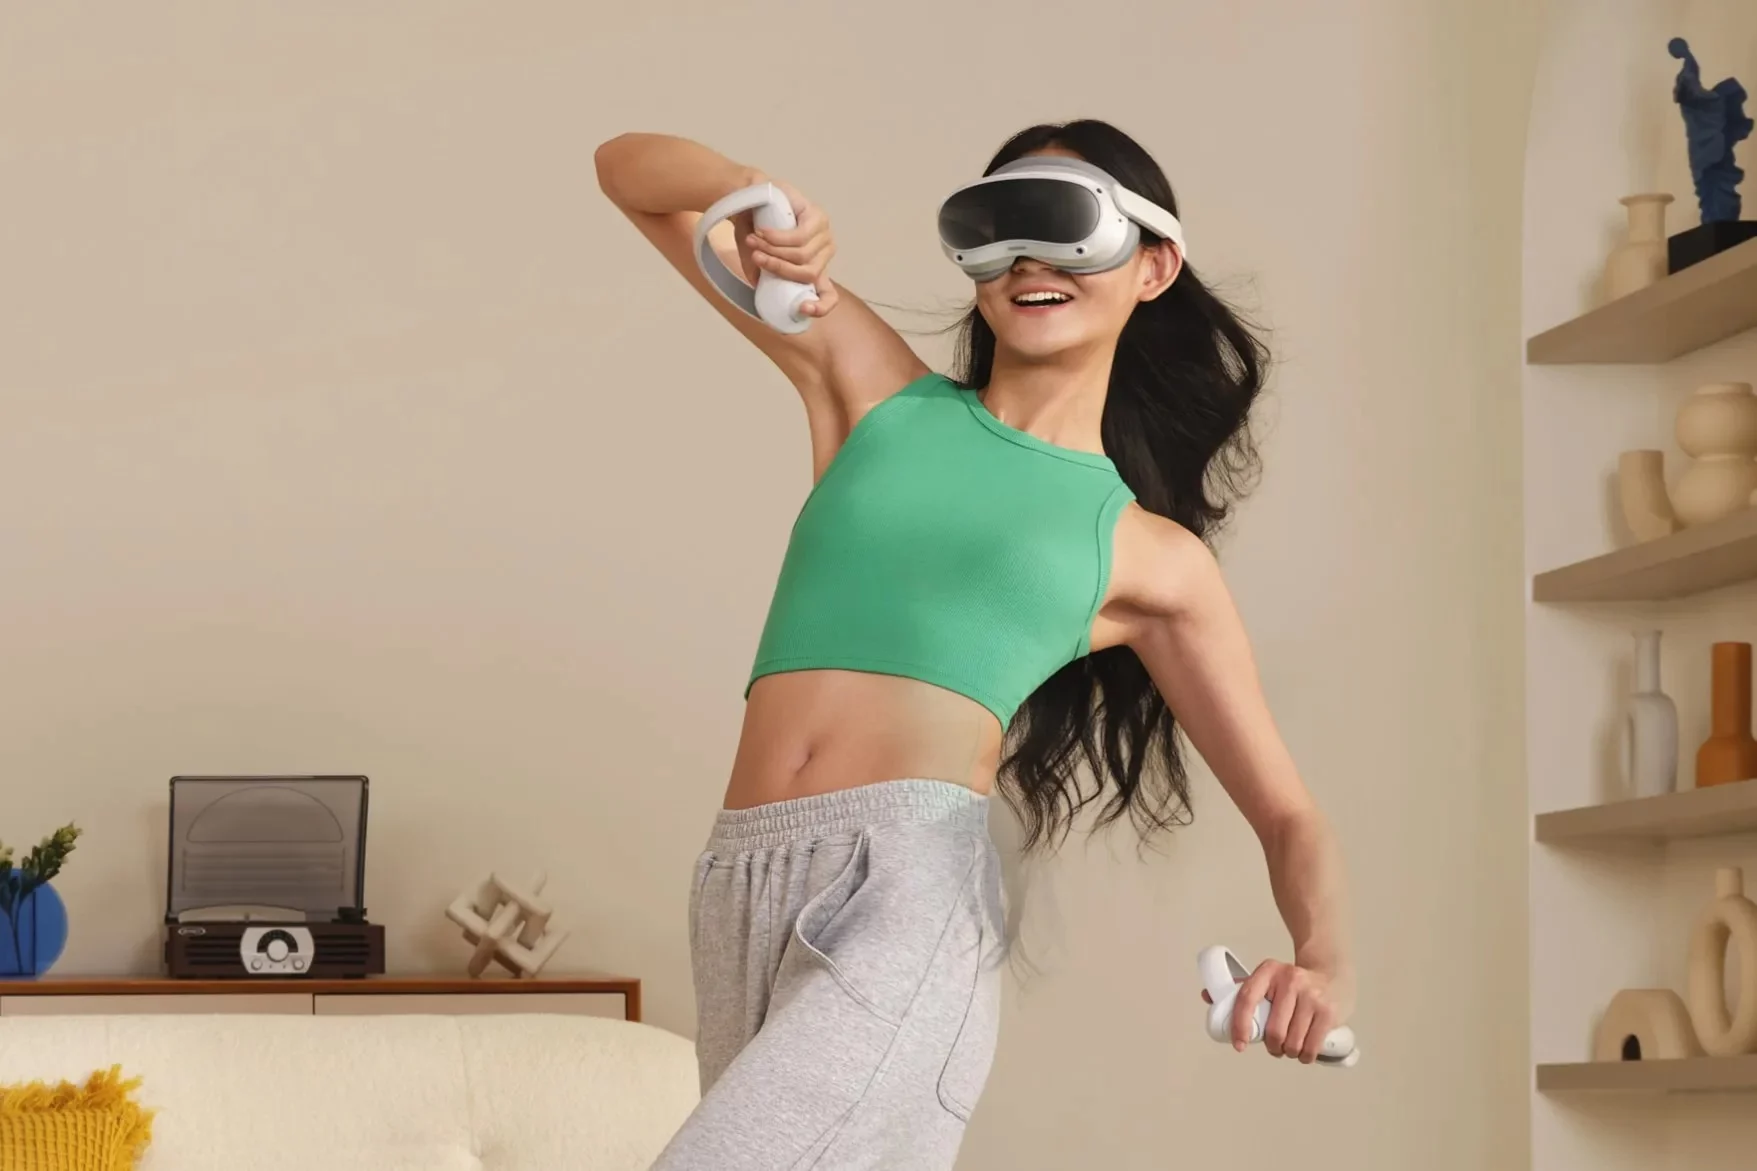 Pico 4 VR headset includes fitne jpeg